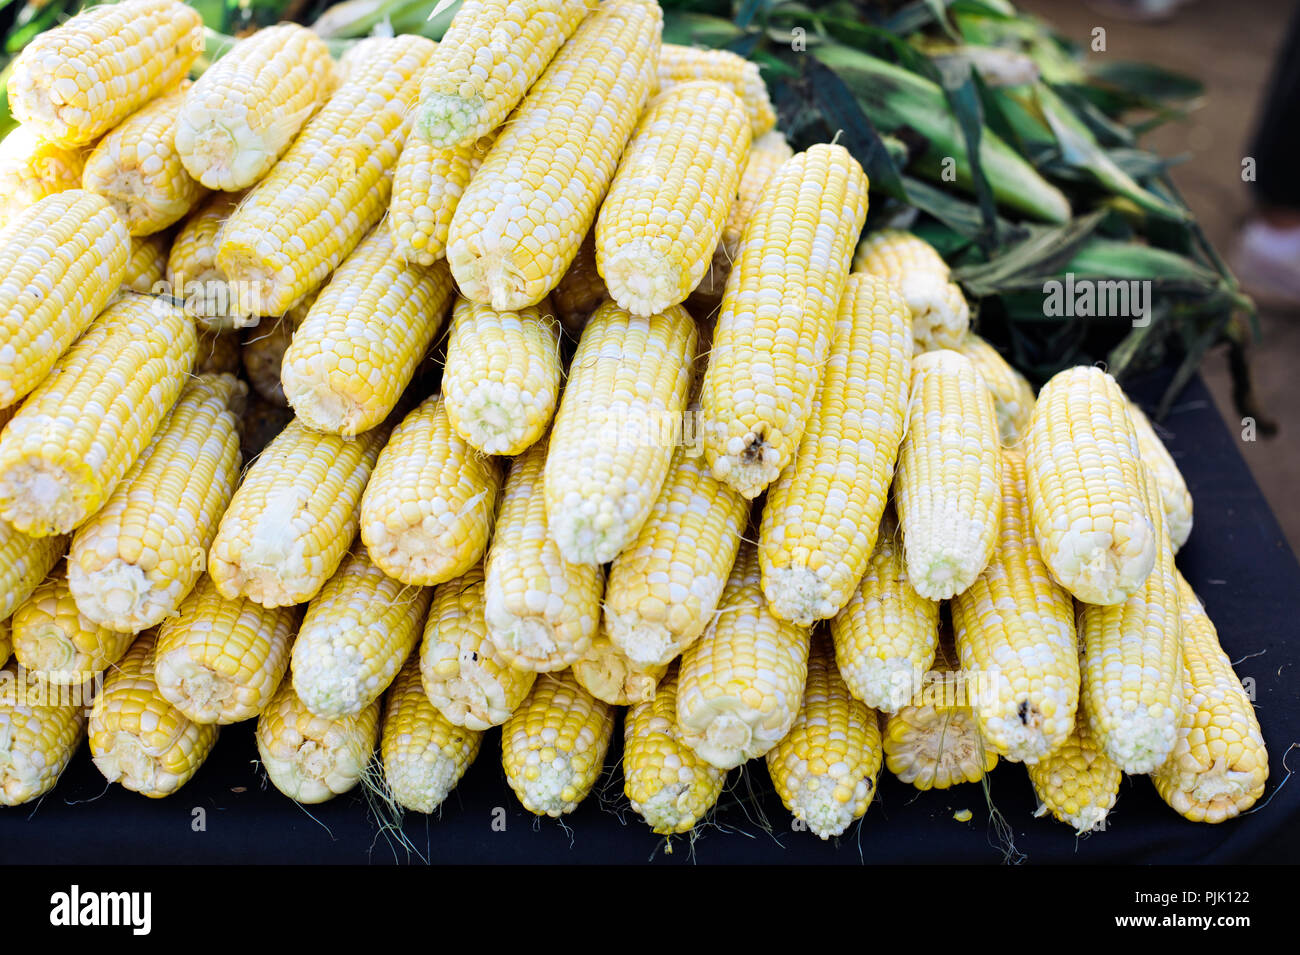 Stacks of colorful and bright yellow corn on the cob at the farmers market Stock Photo